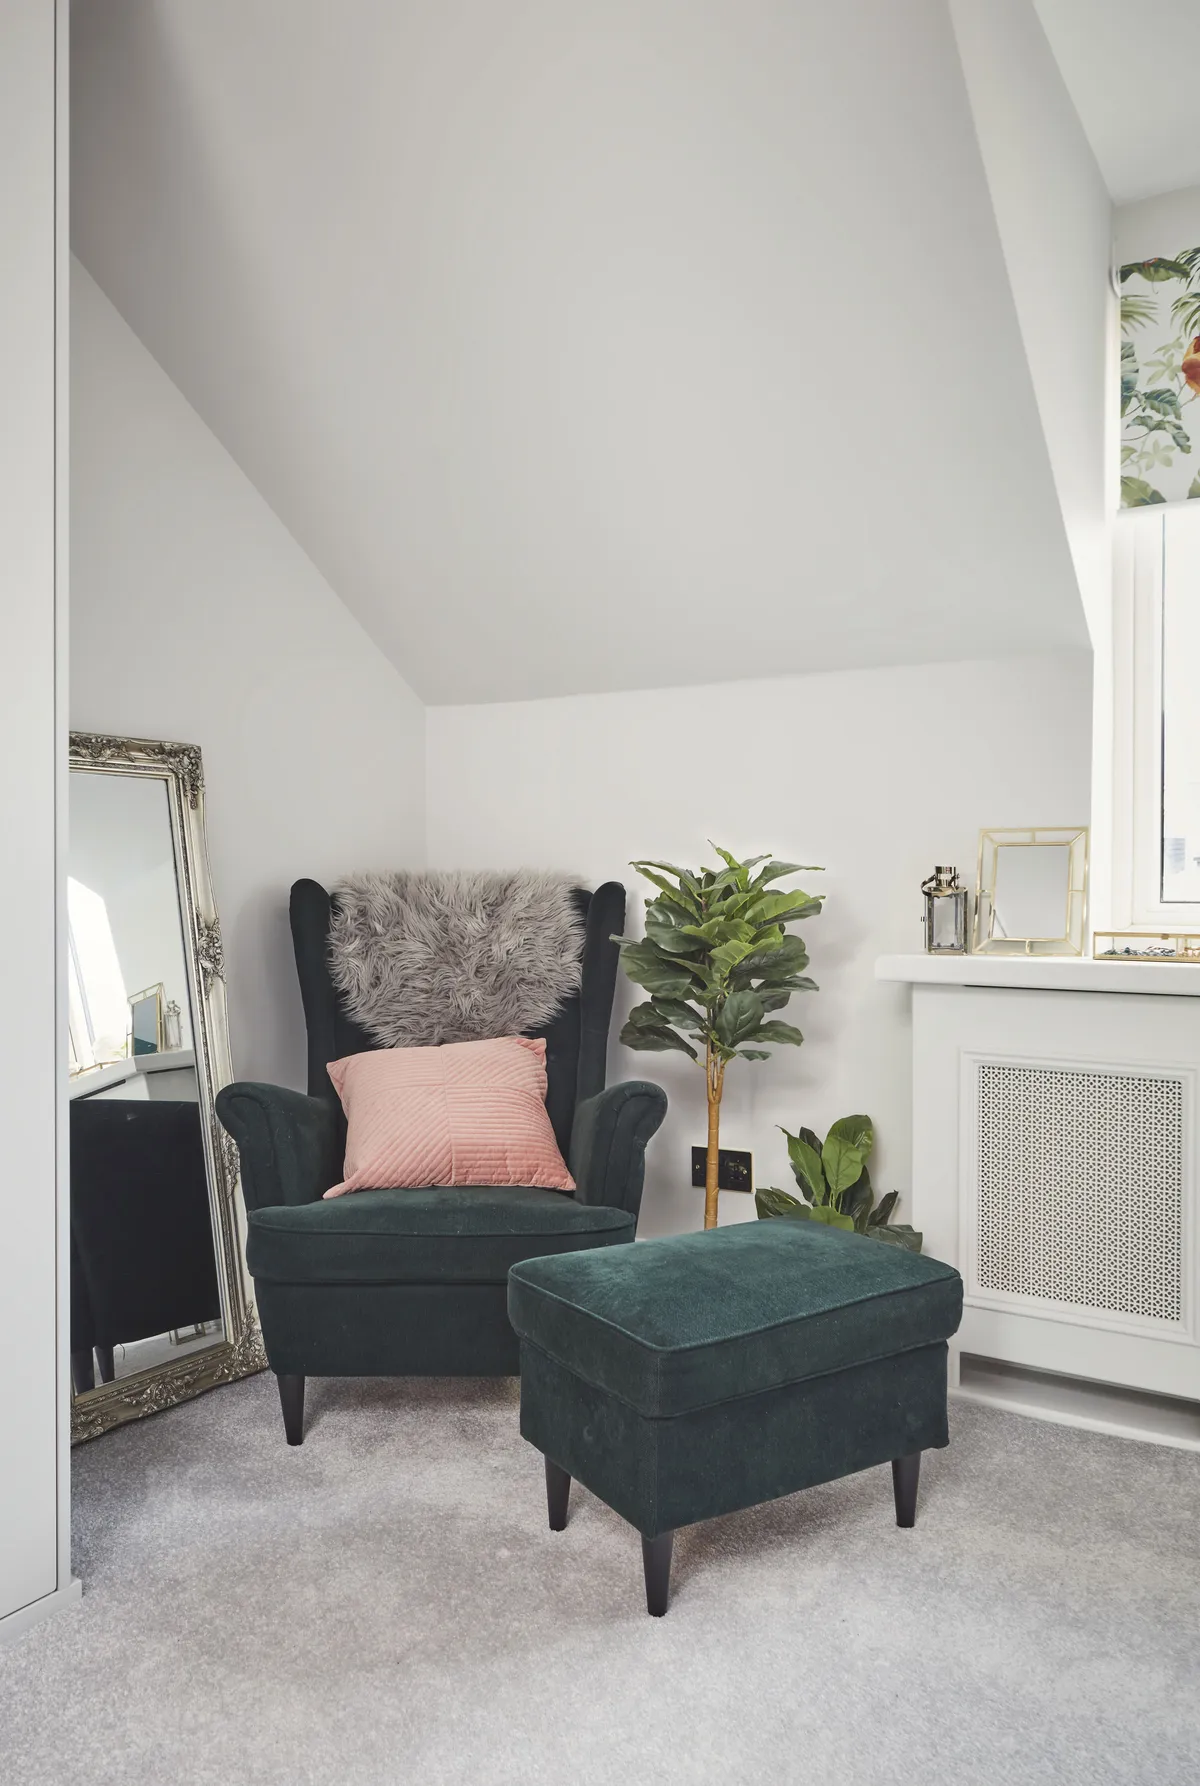 Anne Marie found this bargain velvet chair on a classified site, and has made it even more inviting by styling it with a pink cushion and faux sheepskin throw. The ornate silver mirror was a gift from her sister, and is propped up against the wall for a relaxed look